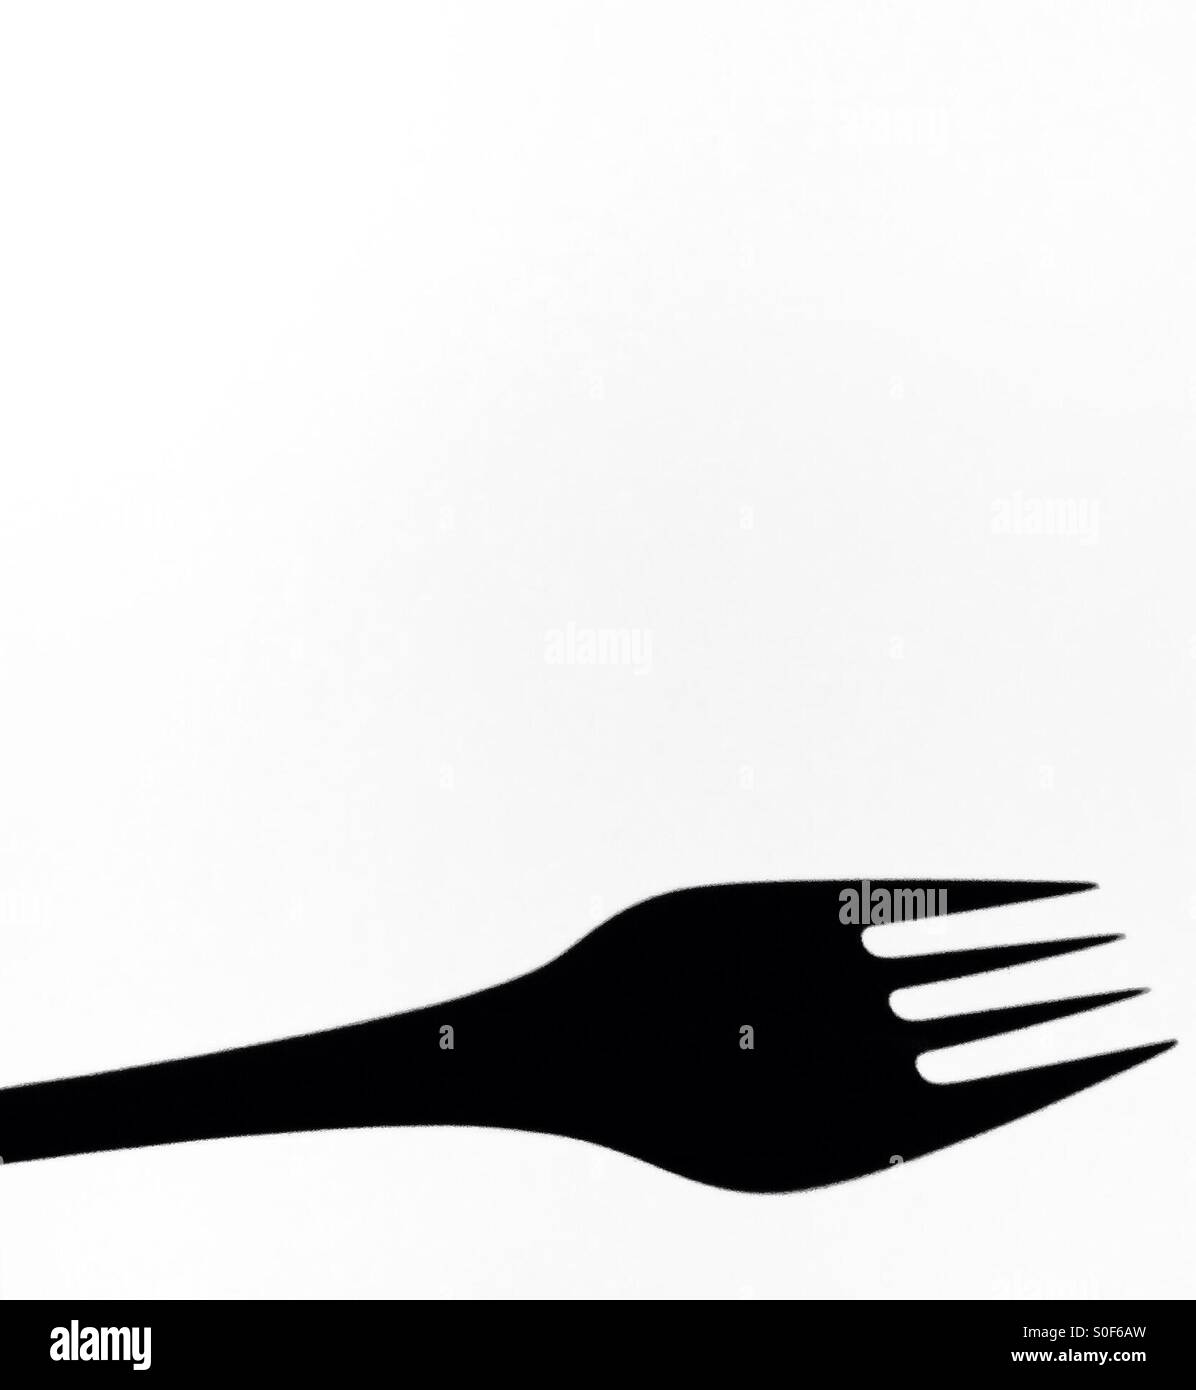 A fork on white background Stock Photo